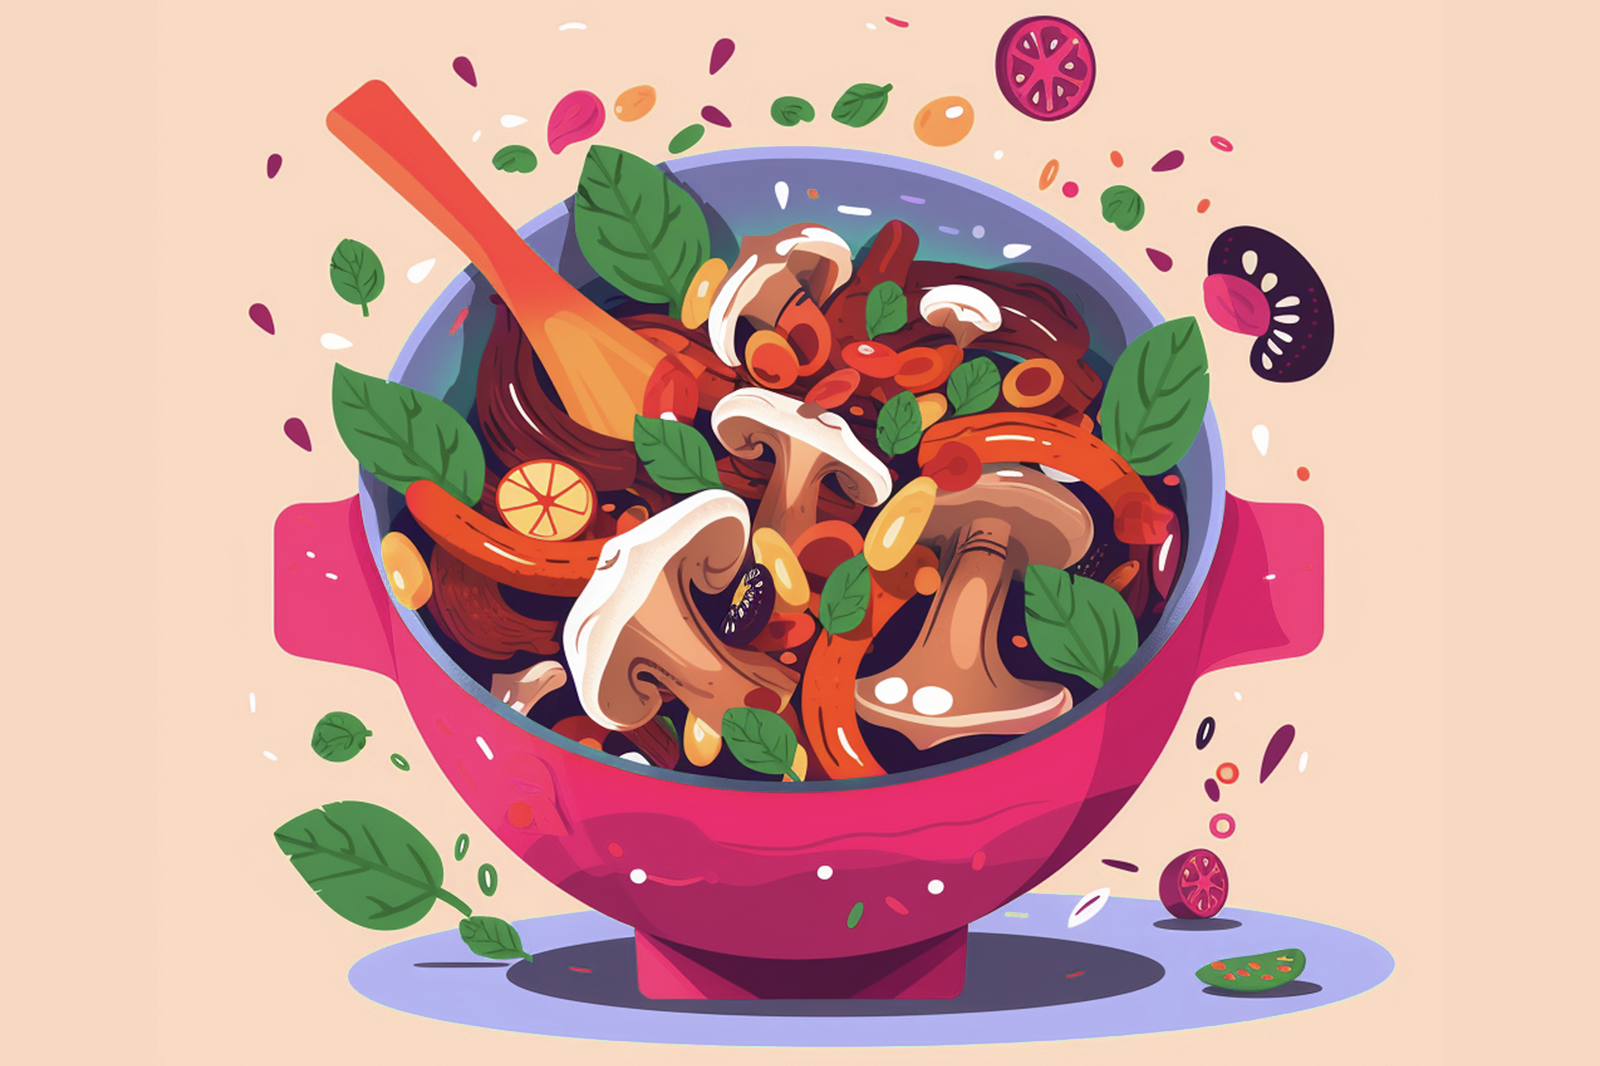 Illustrated spicy mushroom chili in a purple bowl with a spoon, set against a peach-colored background 